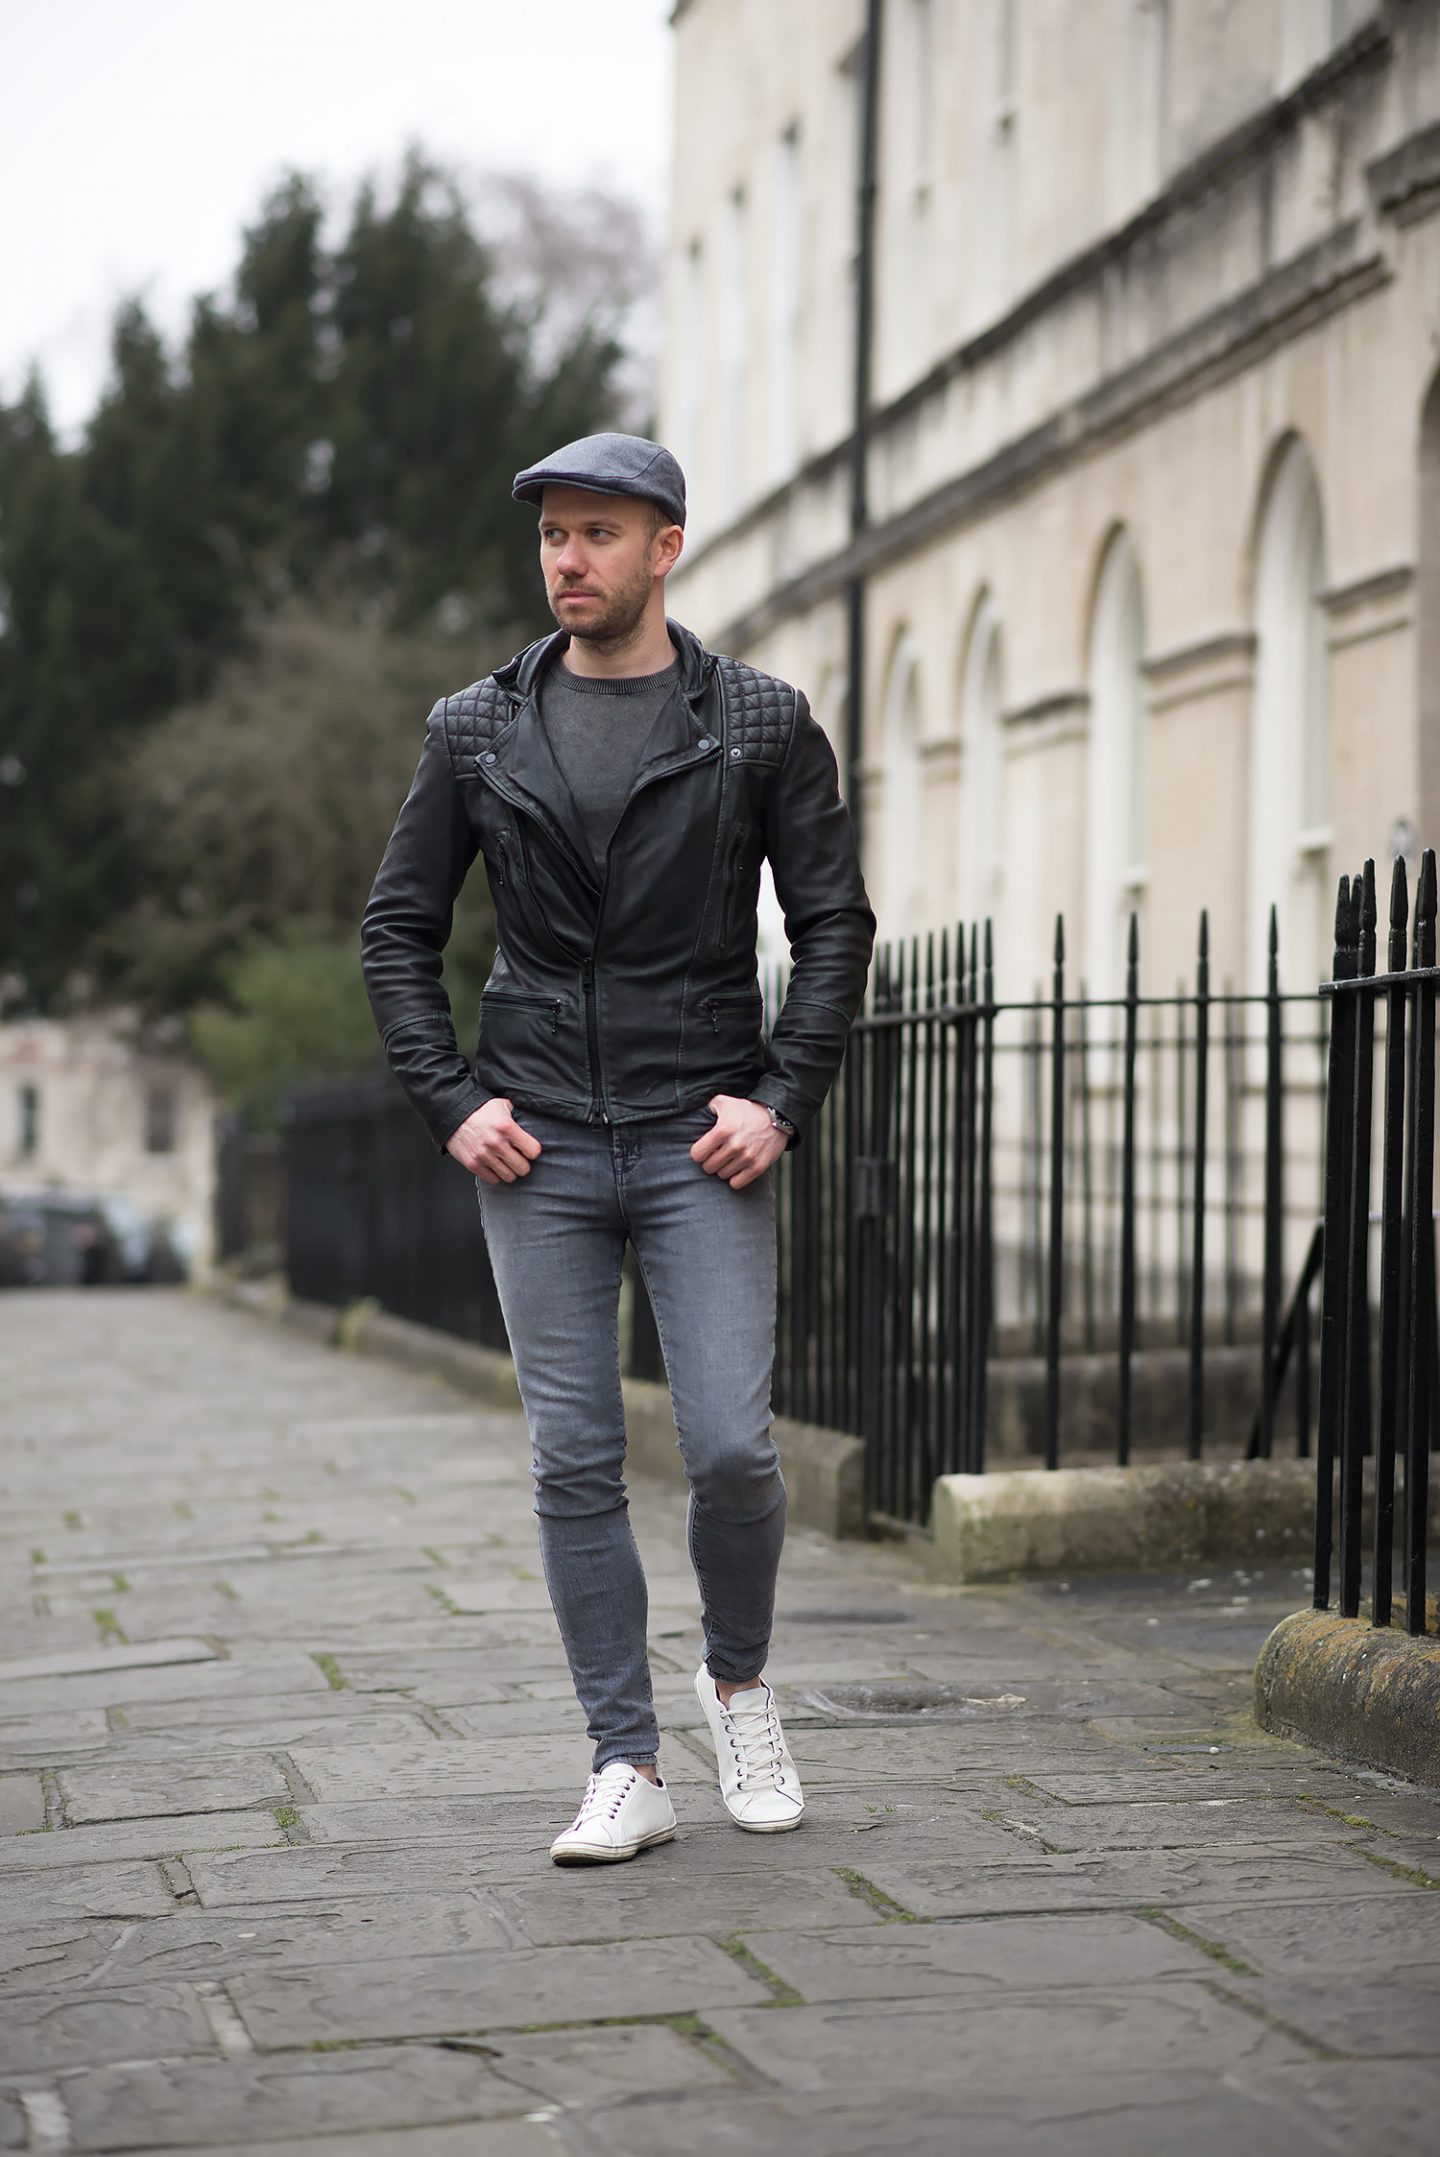 5 Ways To Wear Super Skinny Jeans For Men - Your Average Guy